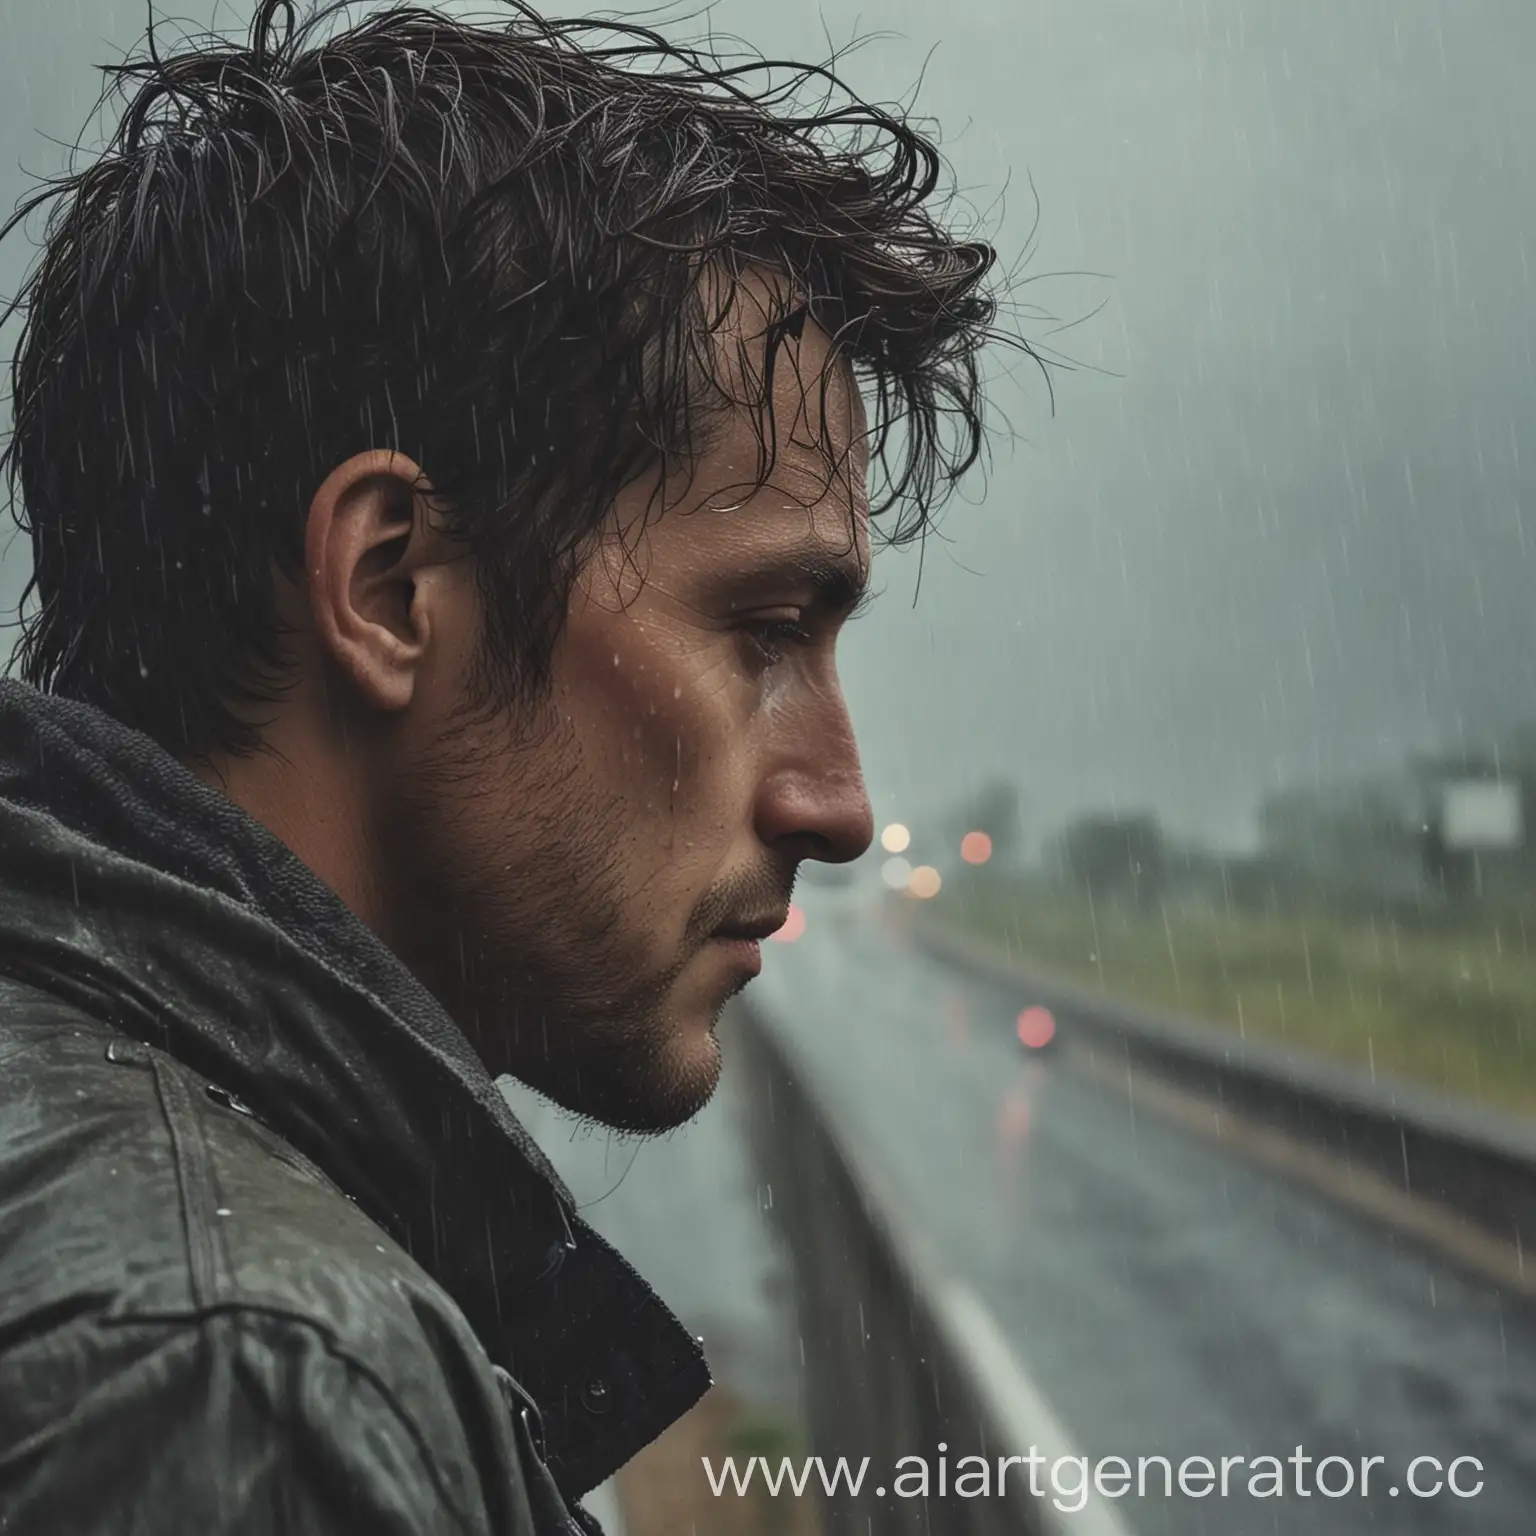 Profile-of-a-Man-Walking-Along-the-Rainy-Highway